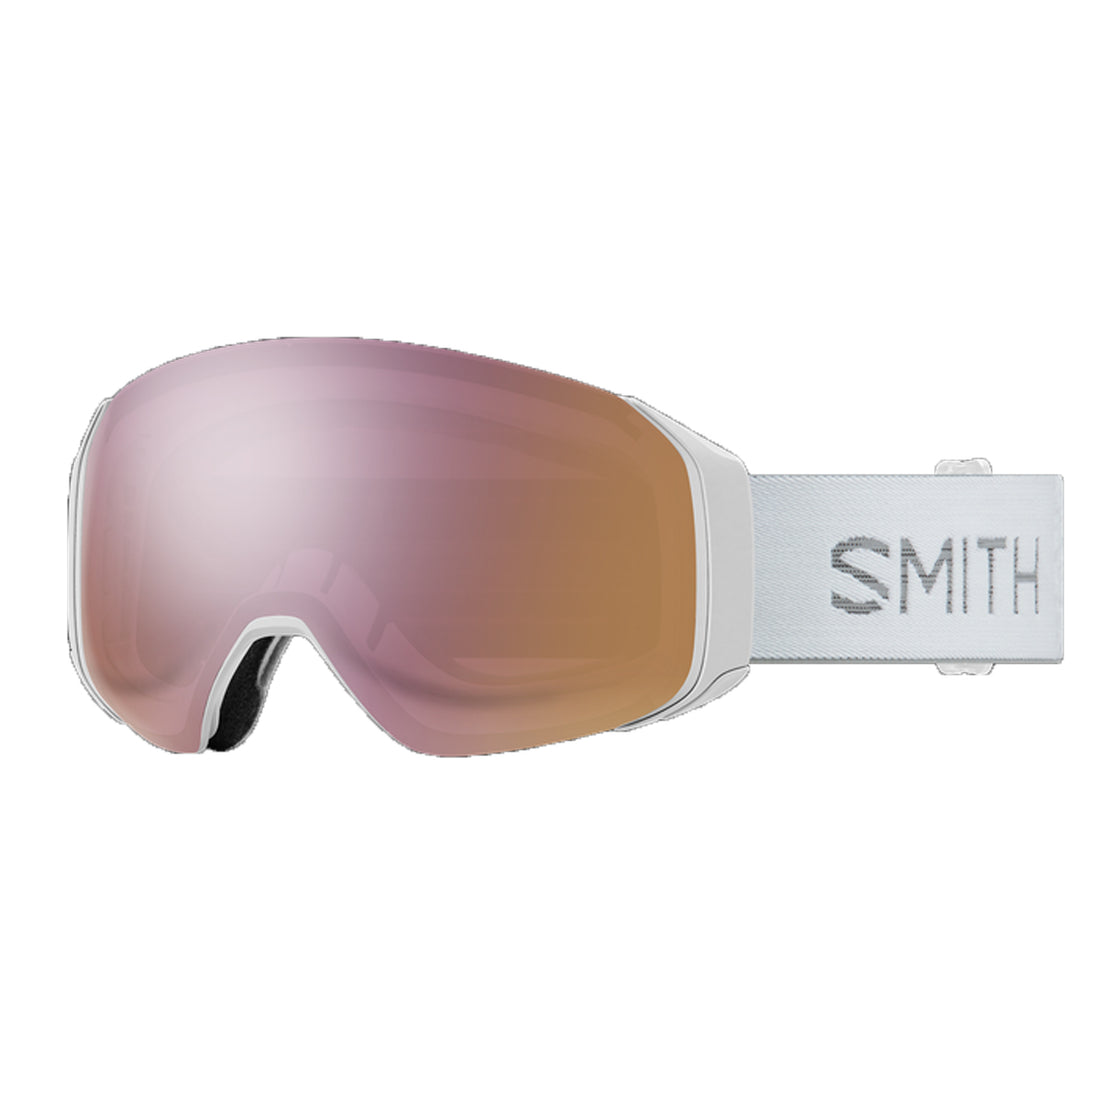 SMITH 4D MAG S SNOWBOARD GOGGLES - LOW BRIDGE FIT